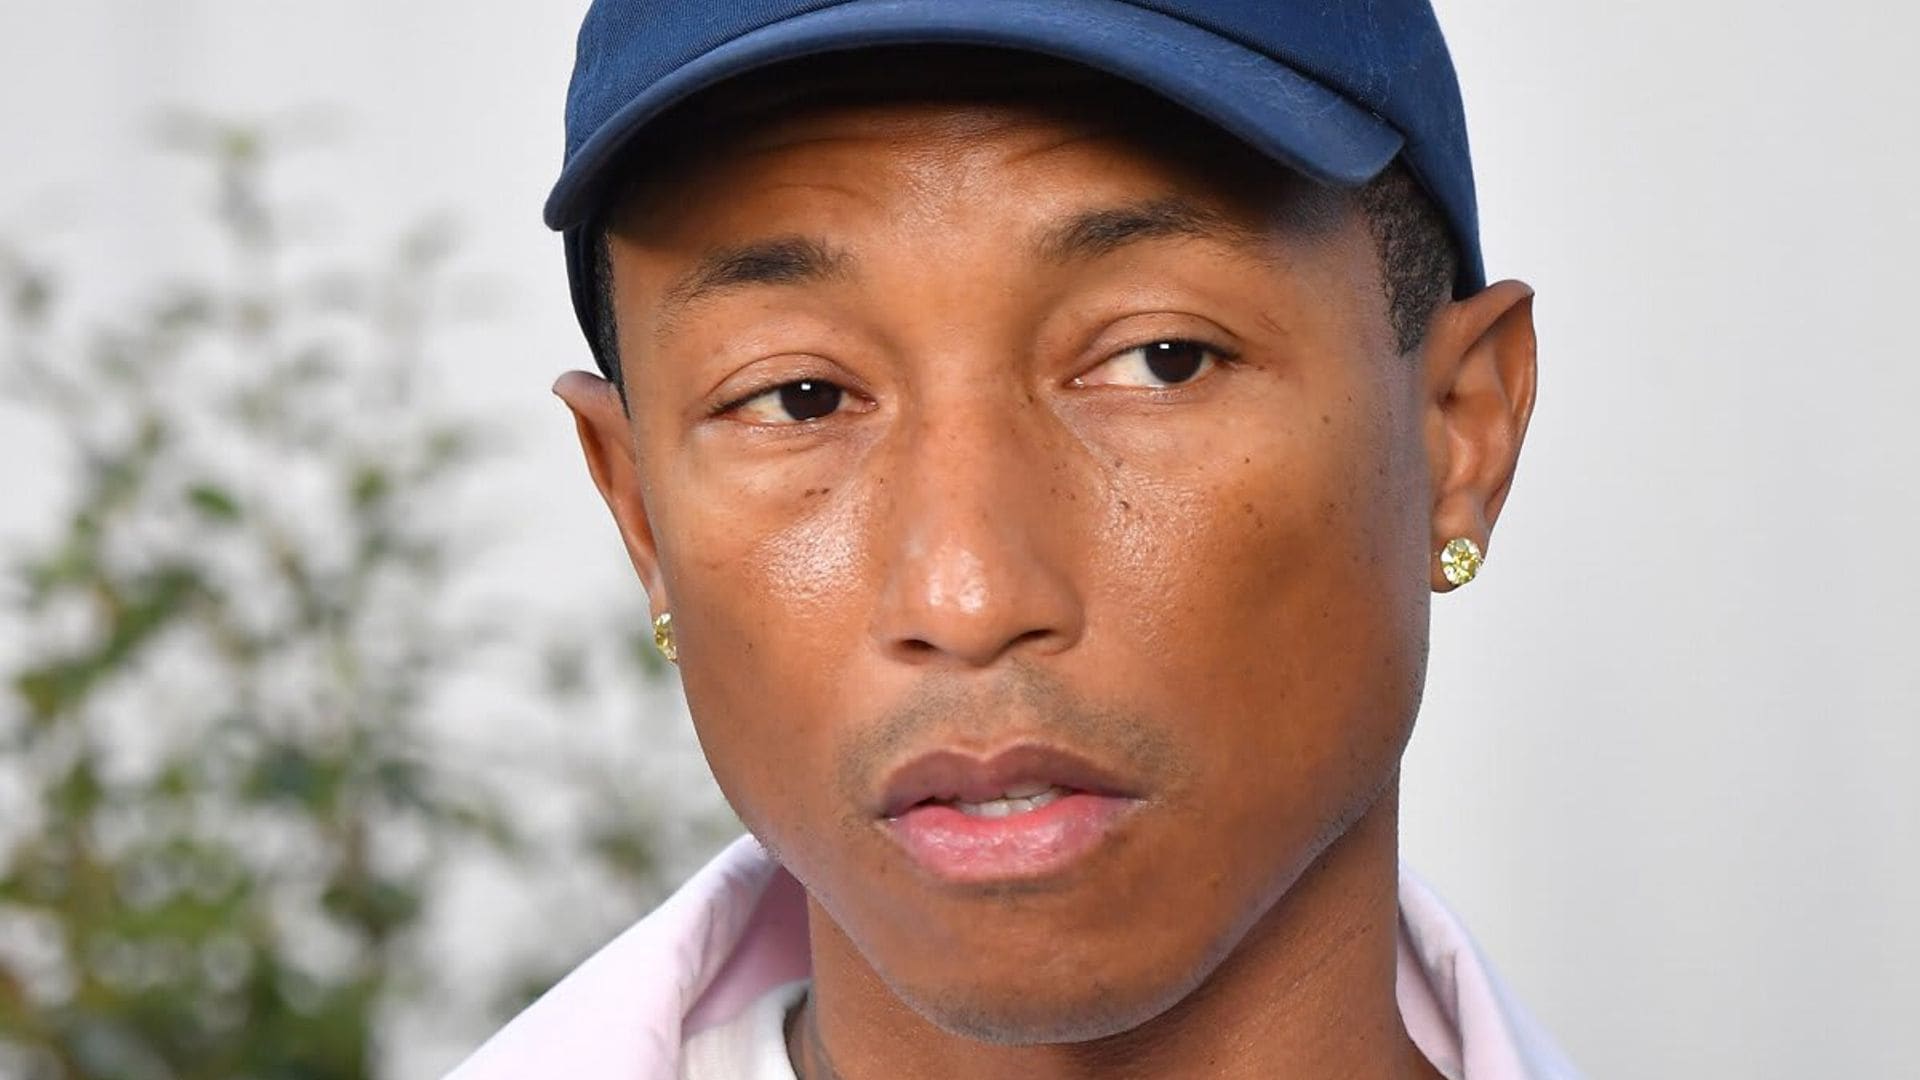 Pharrell Williams says speaking at the funeral of his cousin Donovon Lynch was one of the hardest things